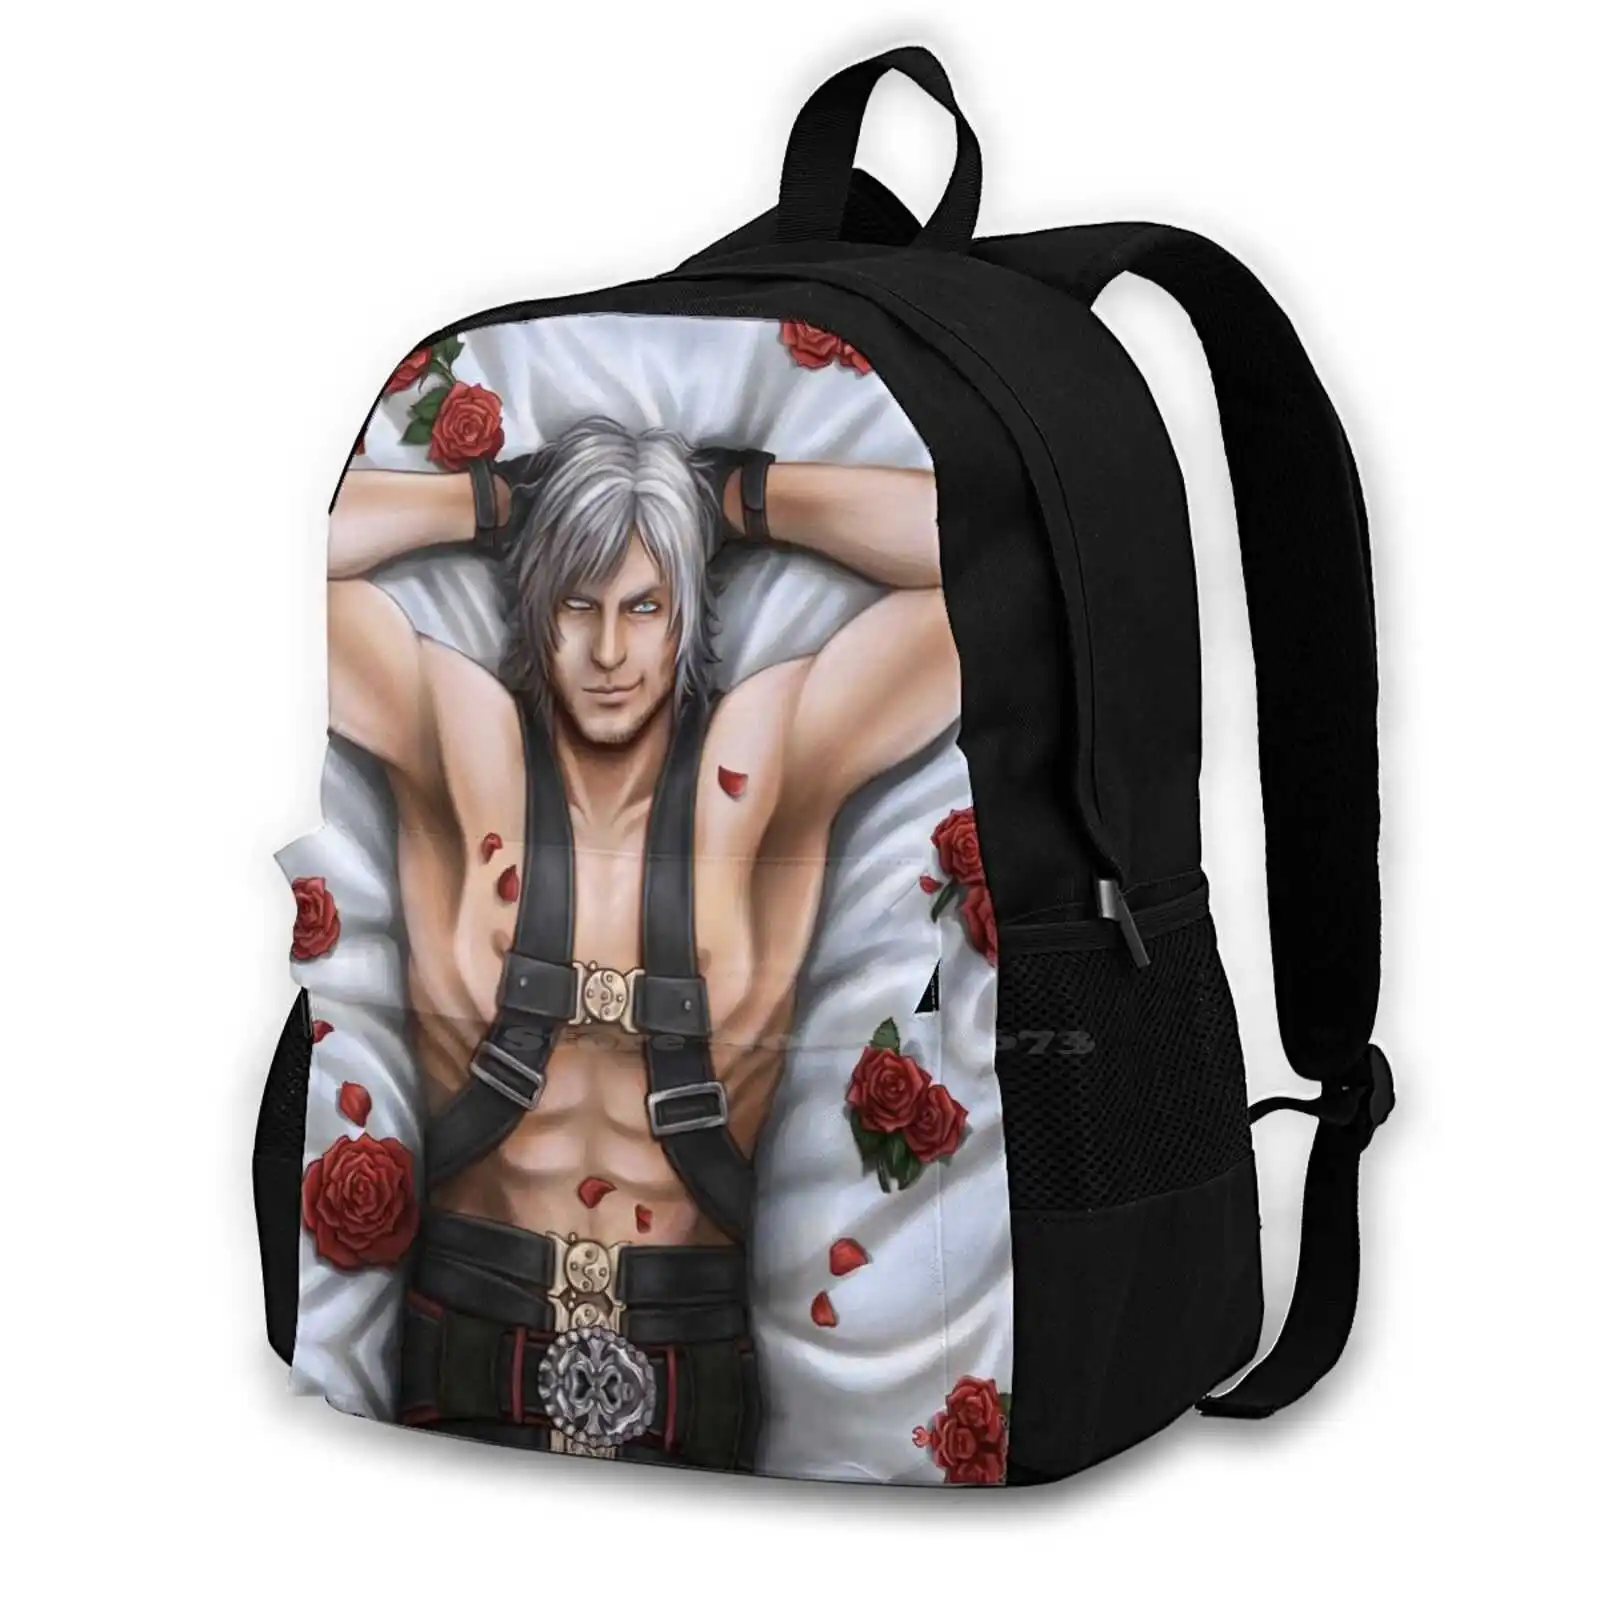 

Sexy Dante Large Capacity Fashion Backpack Laptop Travel Bags Rerinkin Dante Devilmaycry Devil Never Cry Sexy Pizza Roses Bed